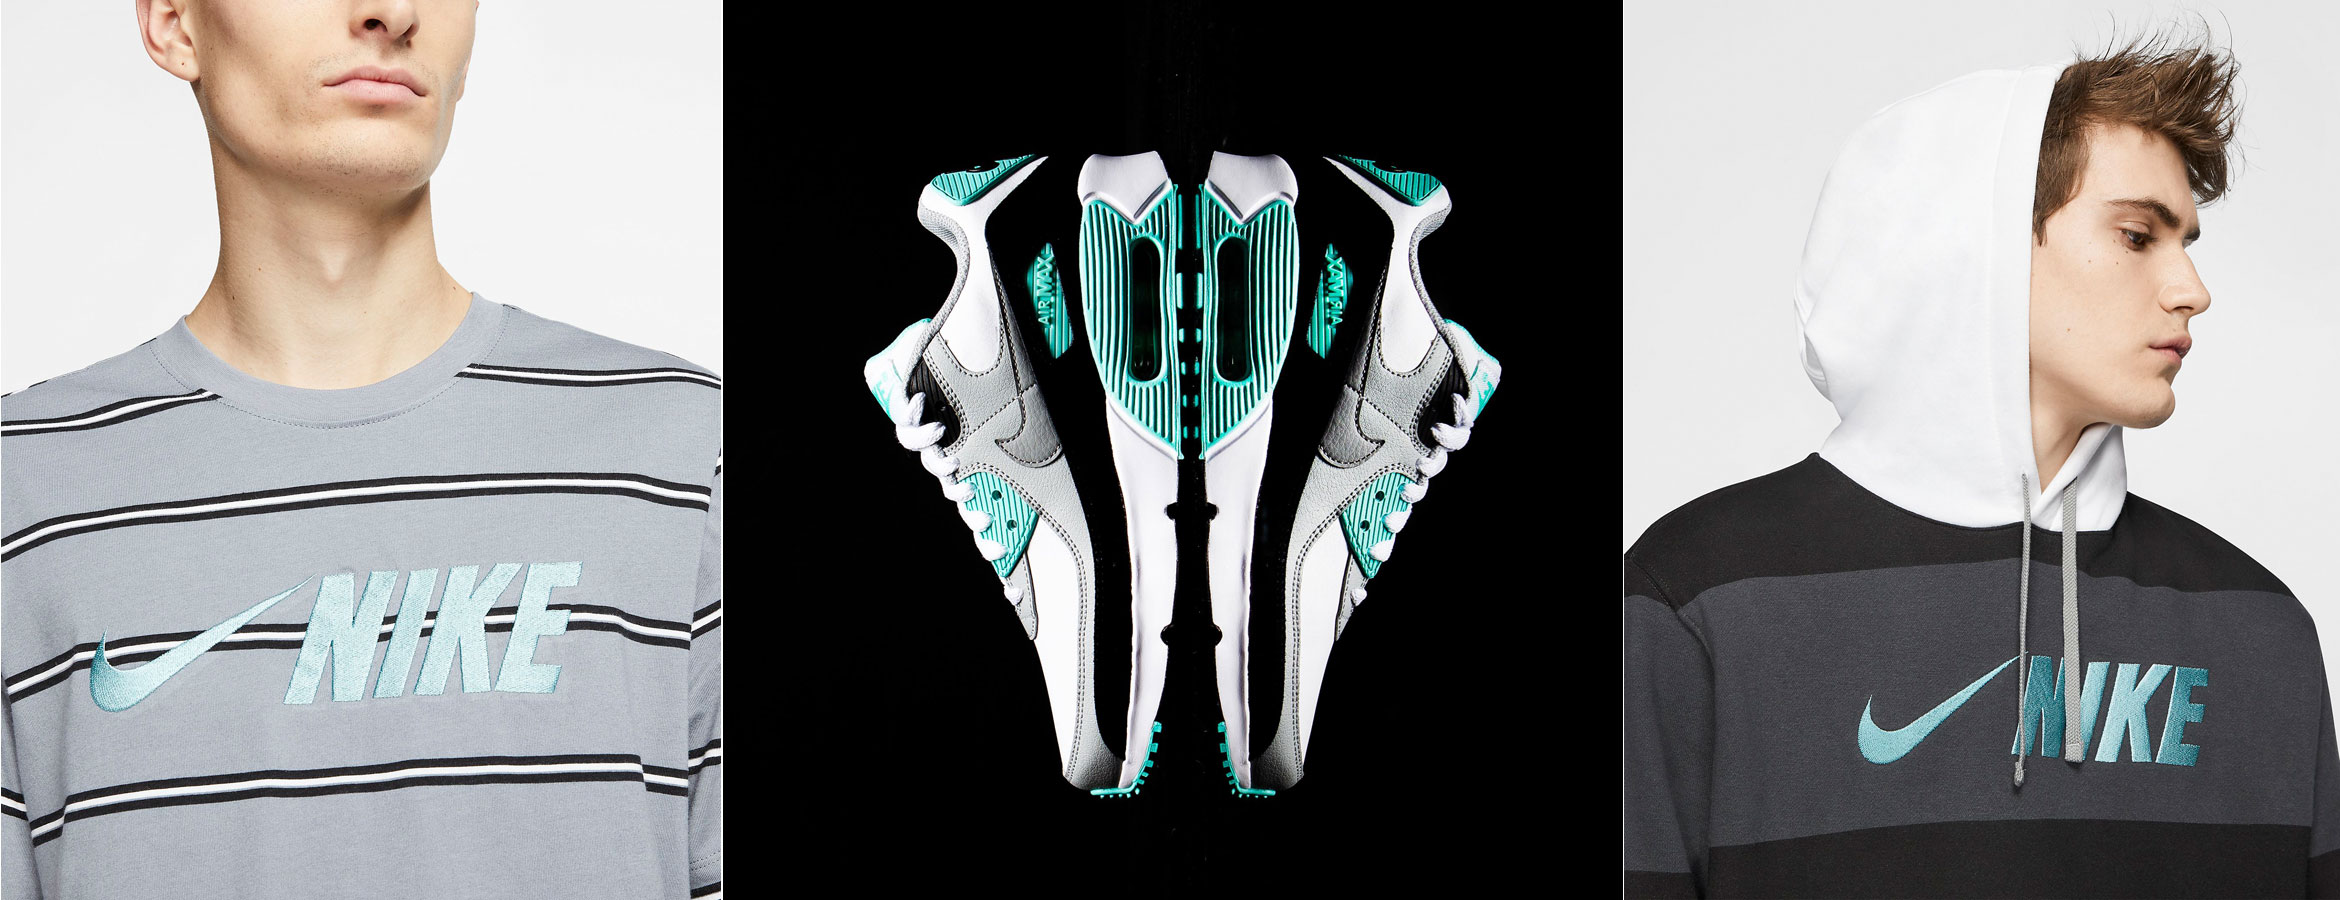 nike-air-max-90-hyper-turquoise-clothing